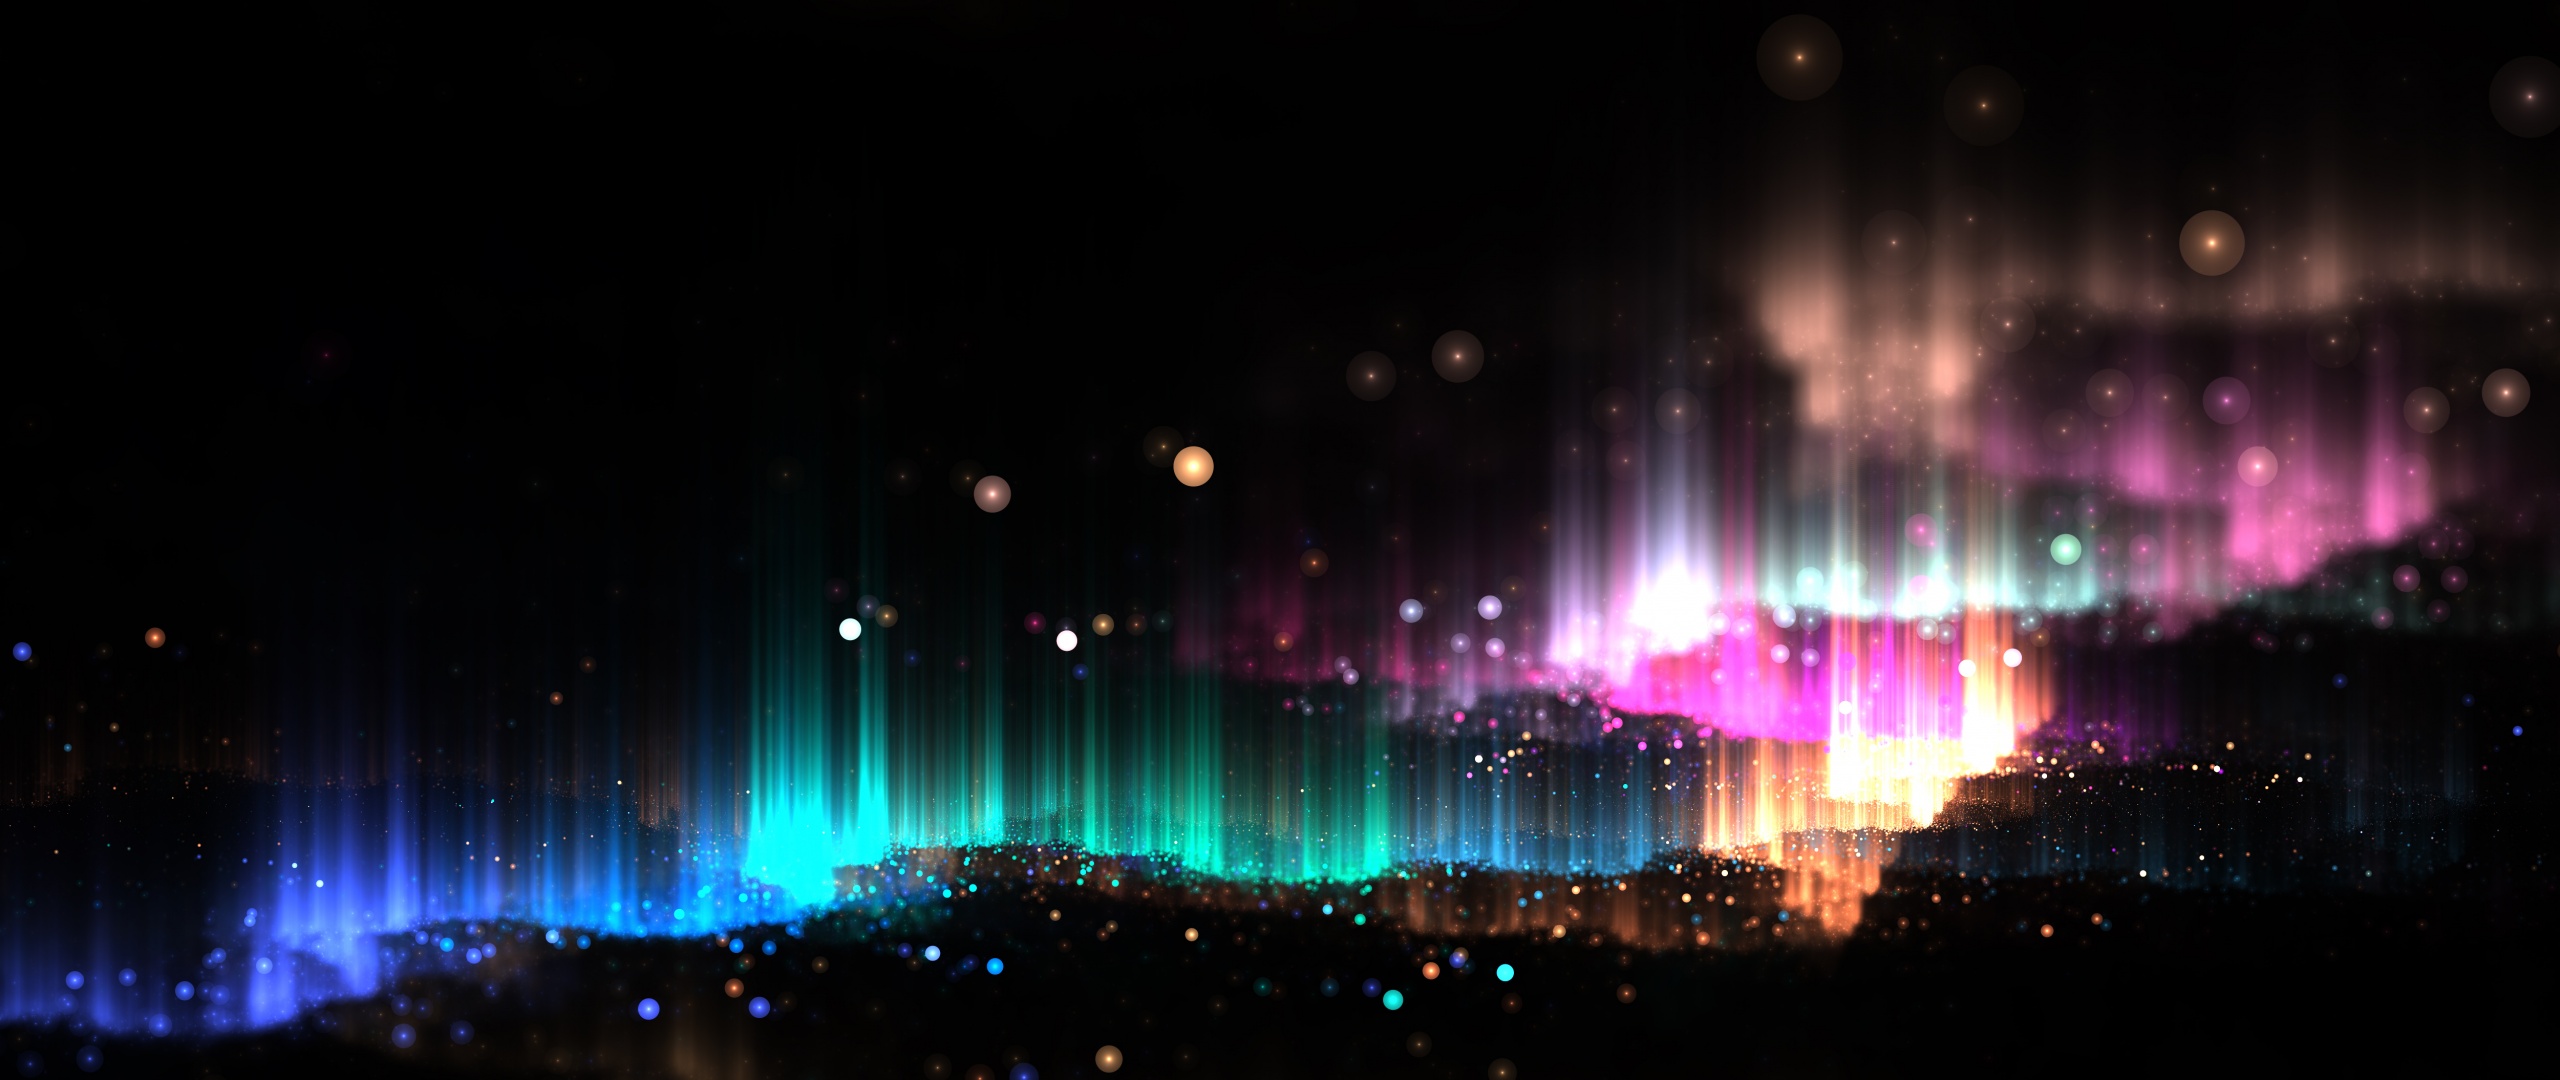 Glitter Wallpaper 4K, Glowing, Colorful, Abstract, #274